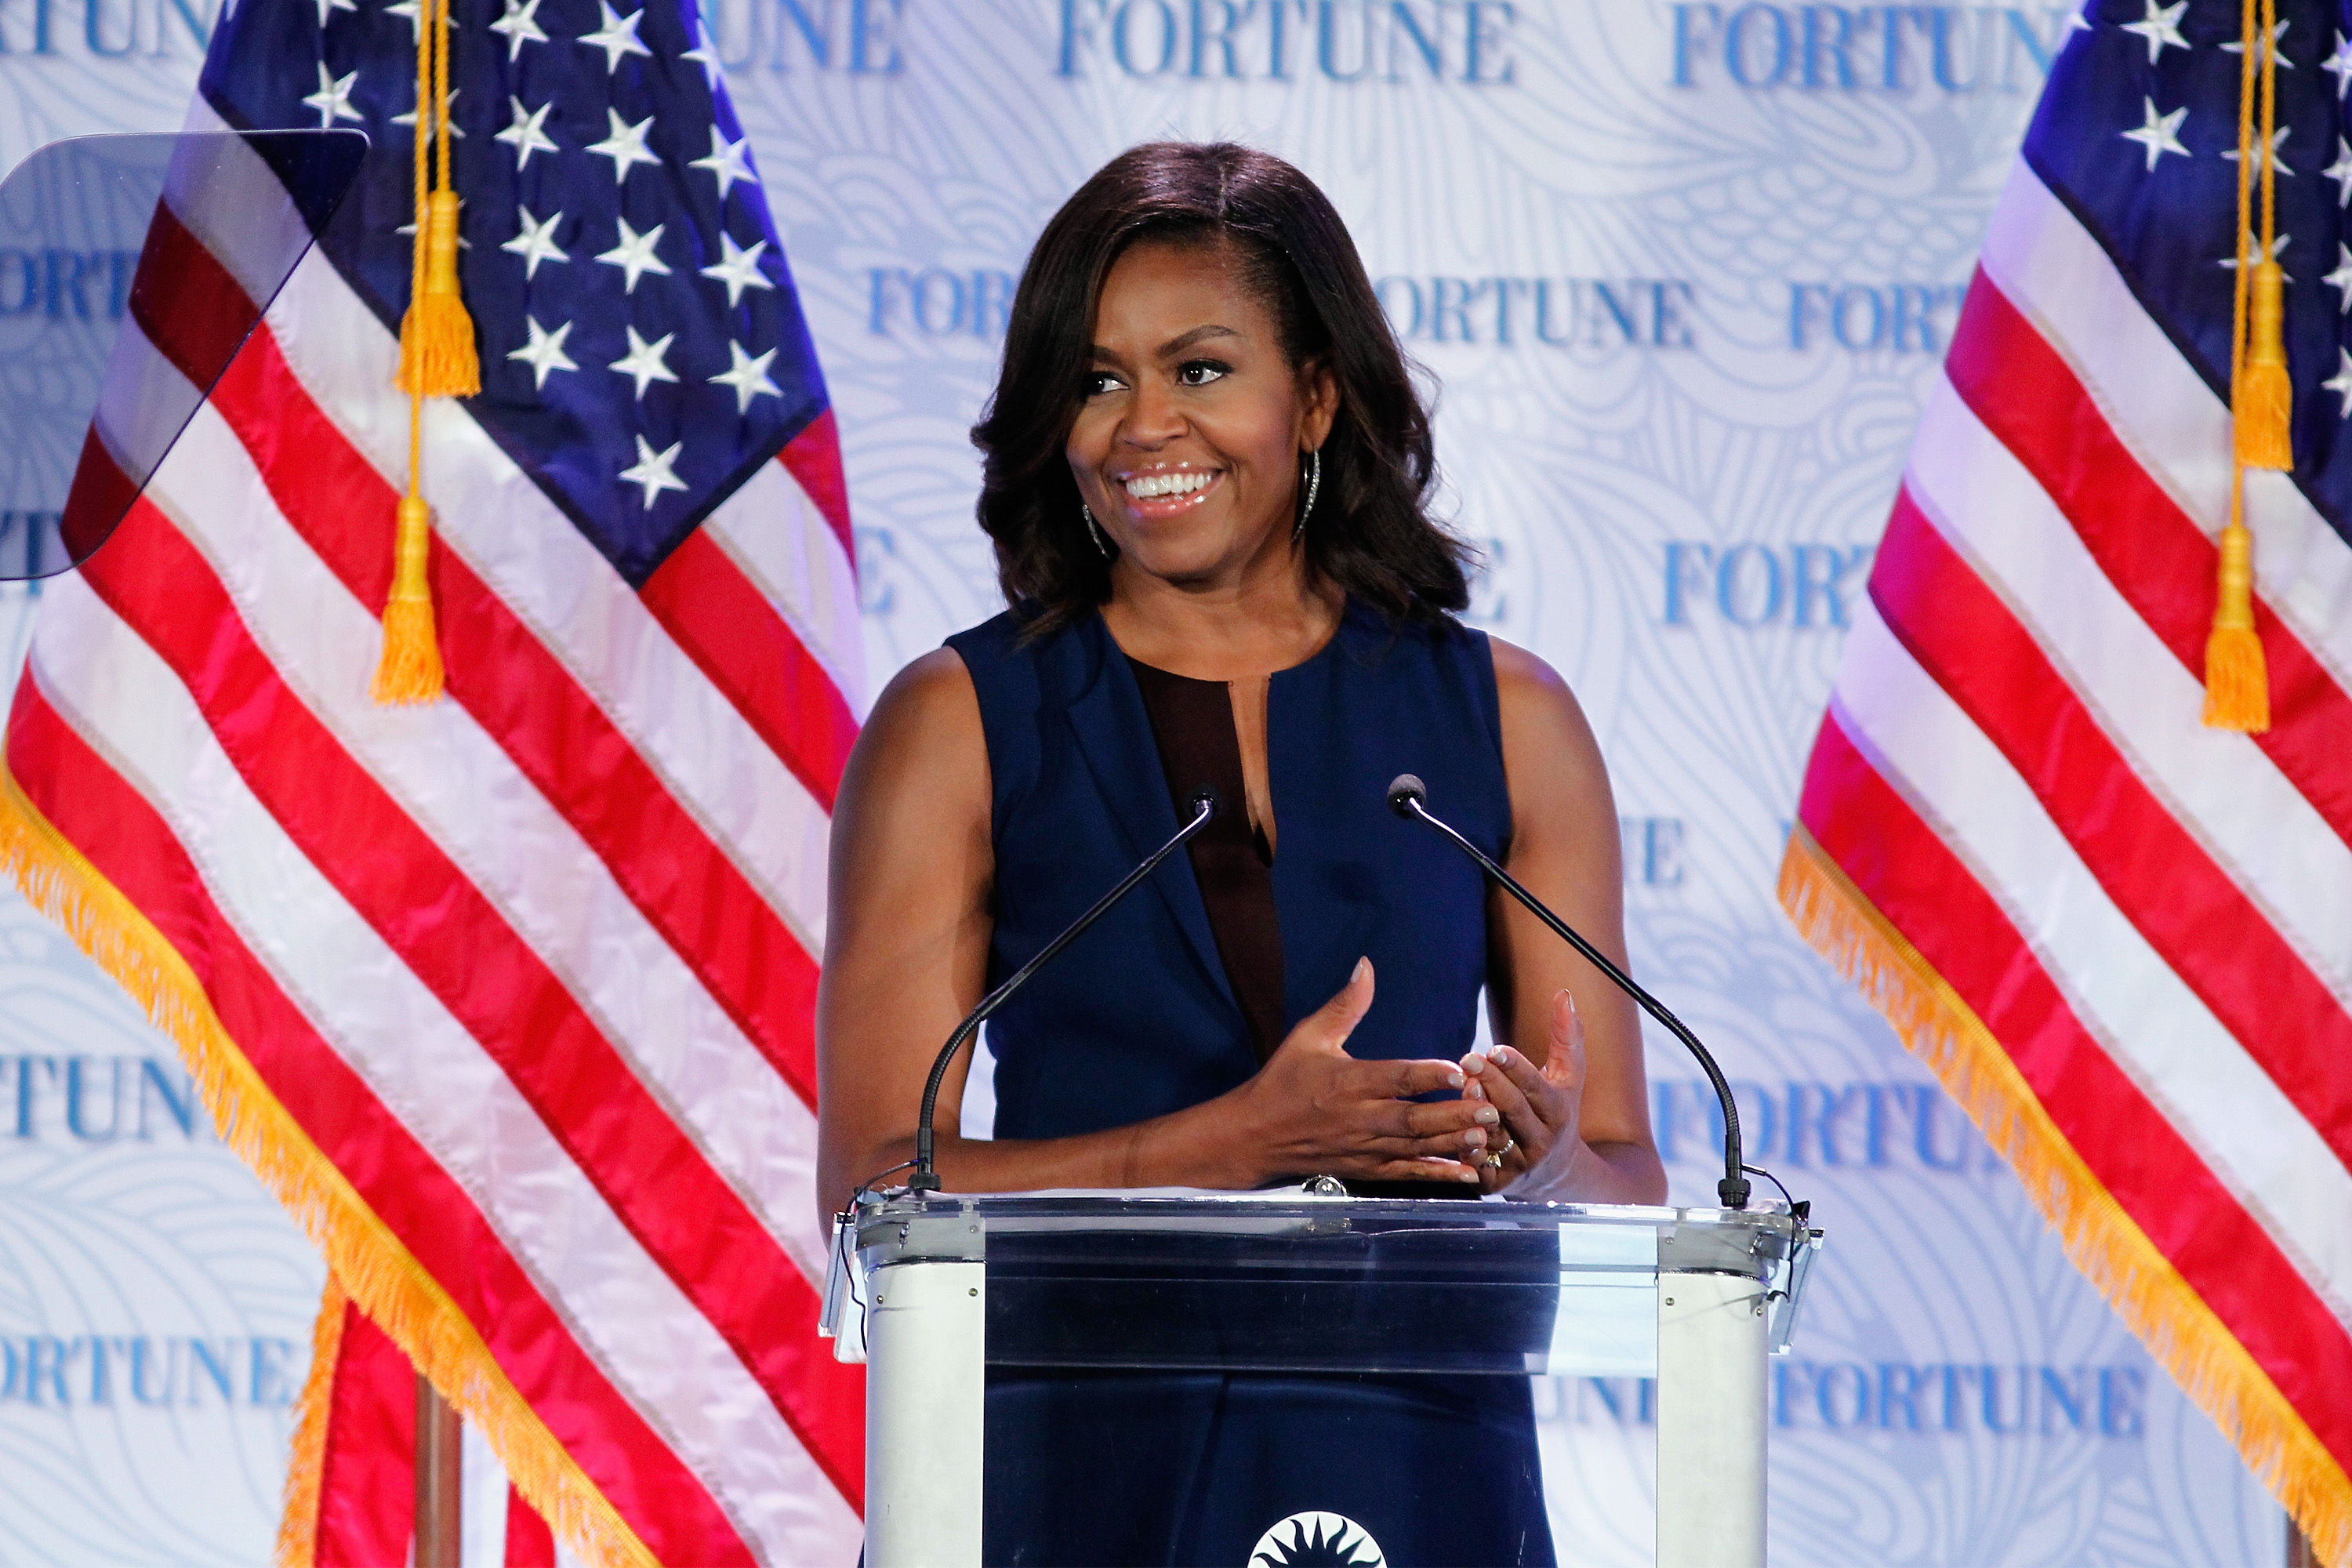 U.S. First Lady Michelle Obama speaks onstage during Fortune's Most Powerful Women Summit - Day 2 at The Robert and Arlene Kogod Courtyard on October 13, 2015 in Washington, DC. (Paul Morigi—Getty Images)